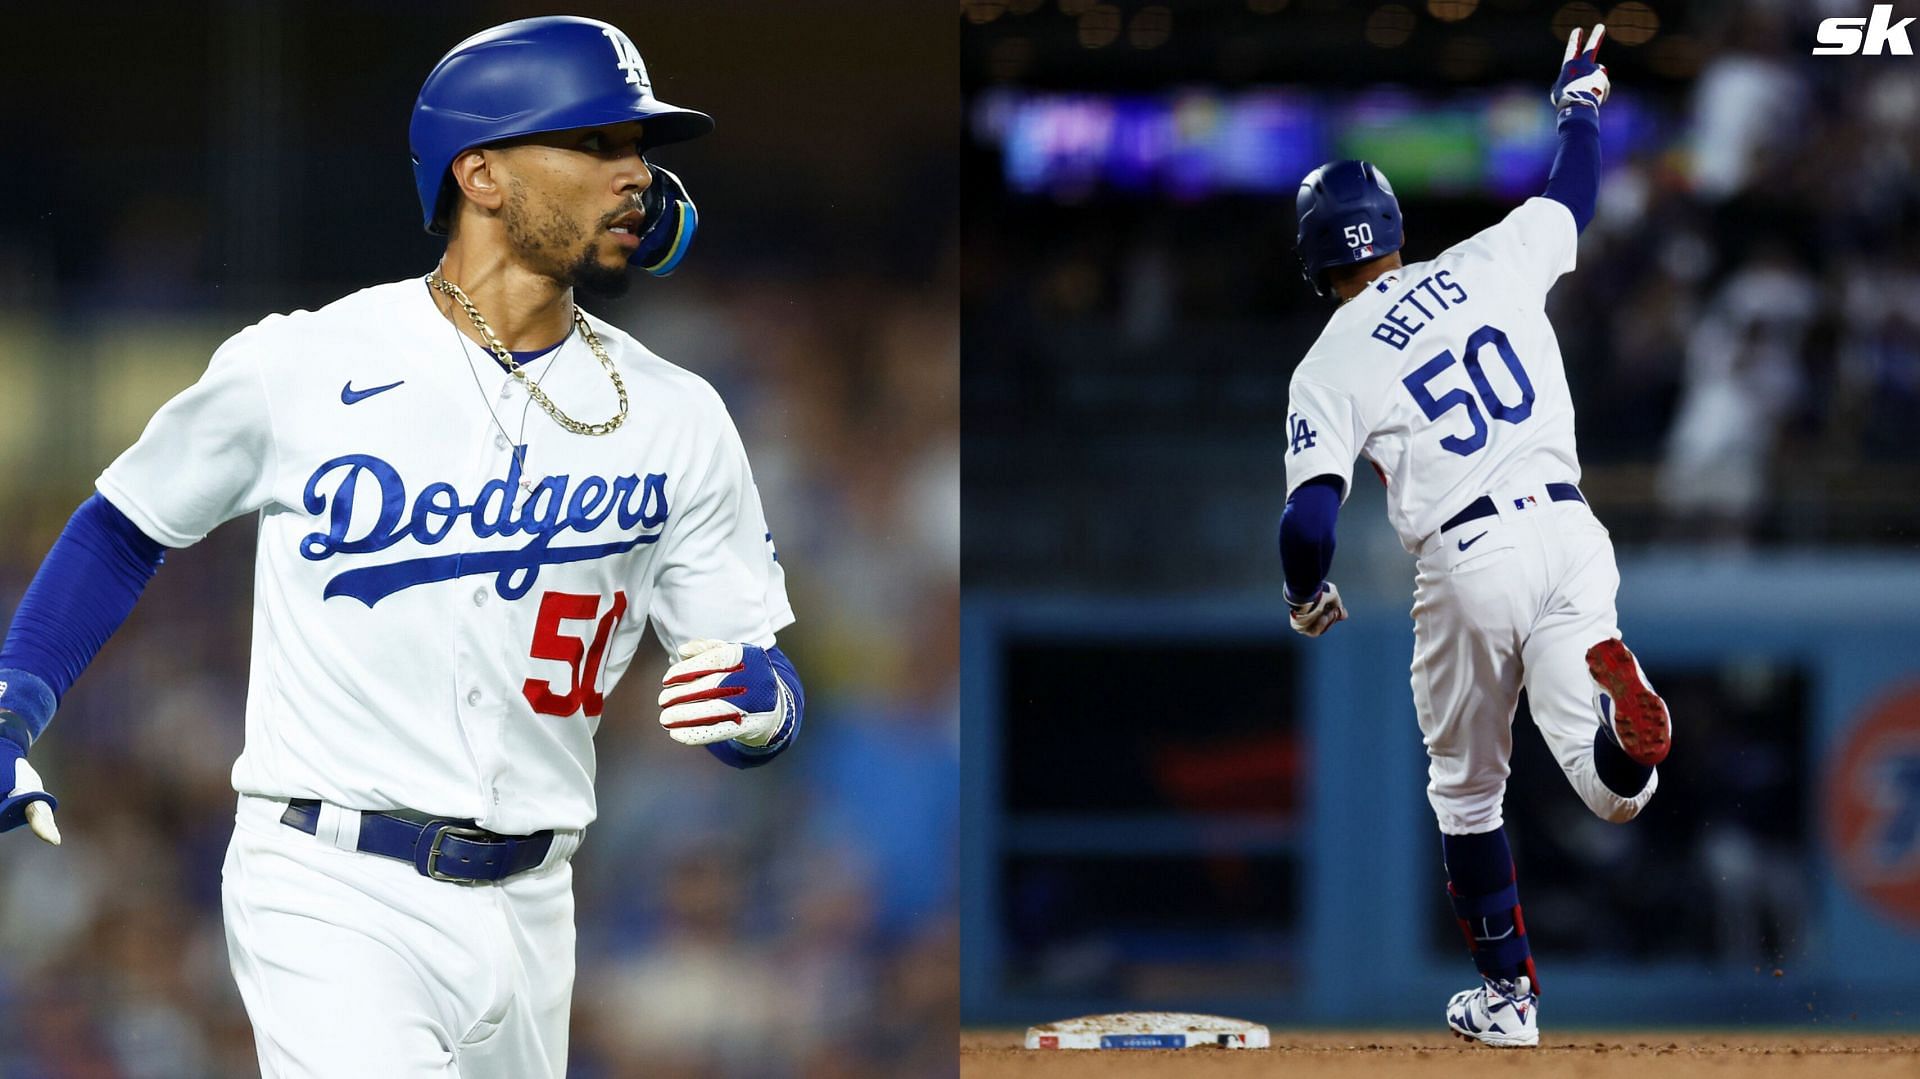 Mookie Betts is eyeing a quick return for the Dodgers